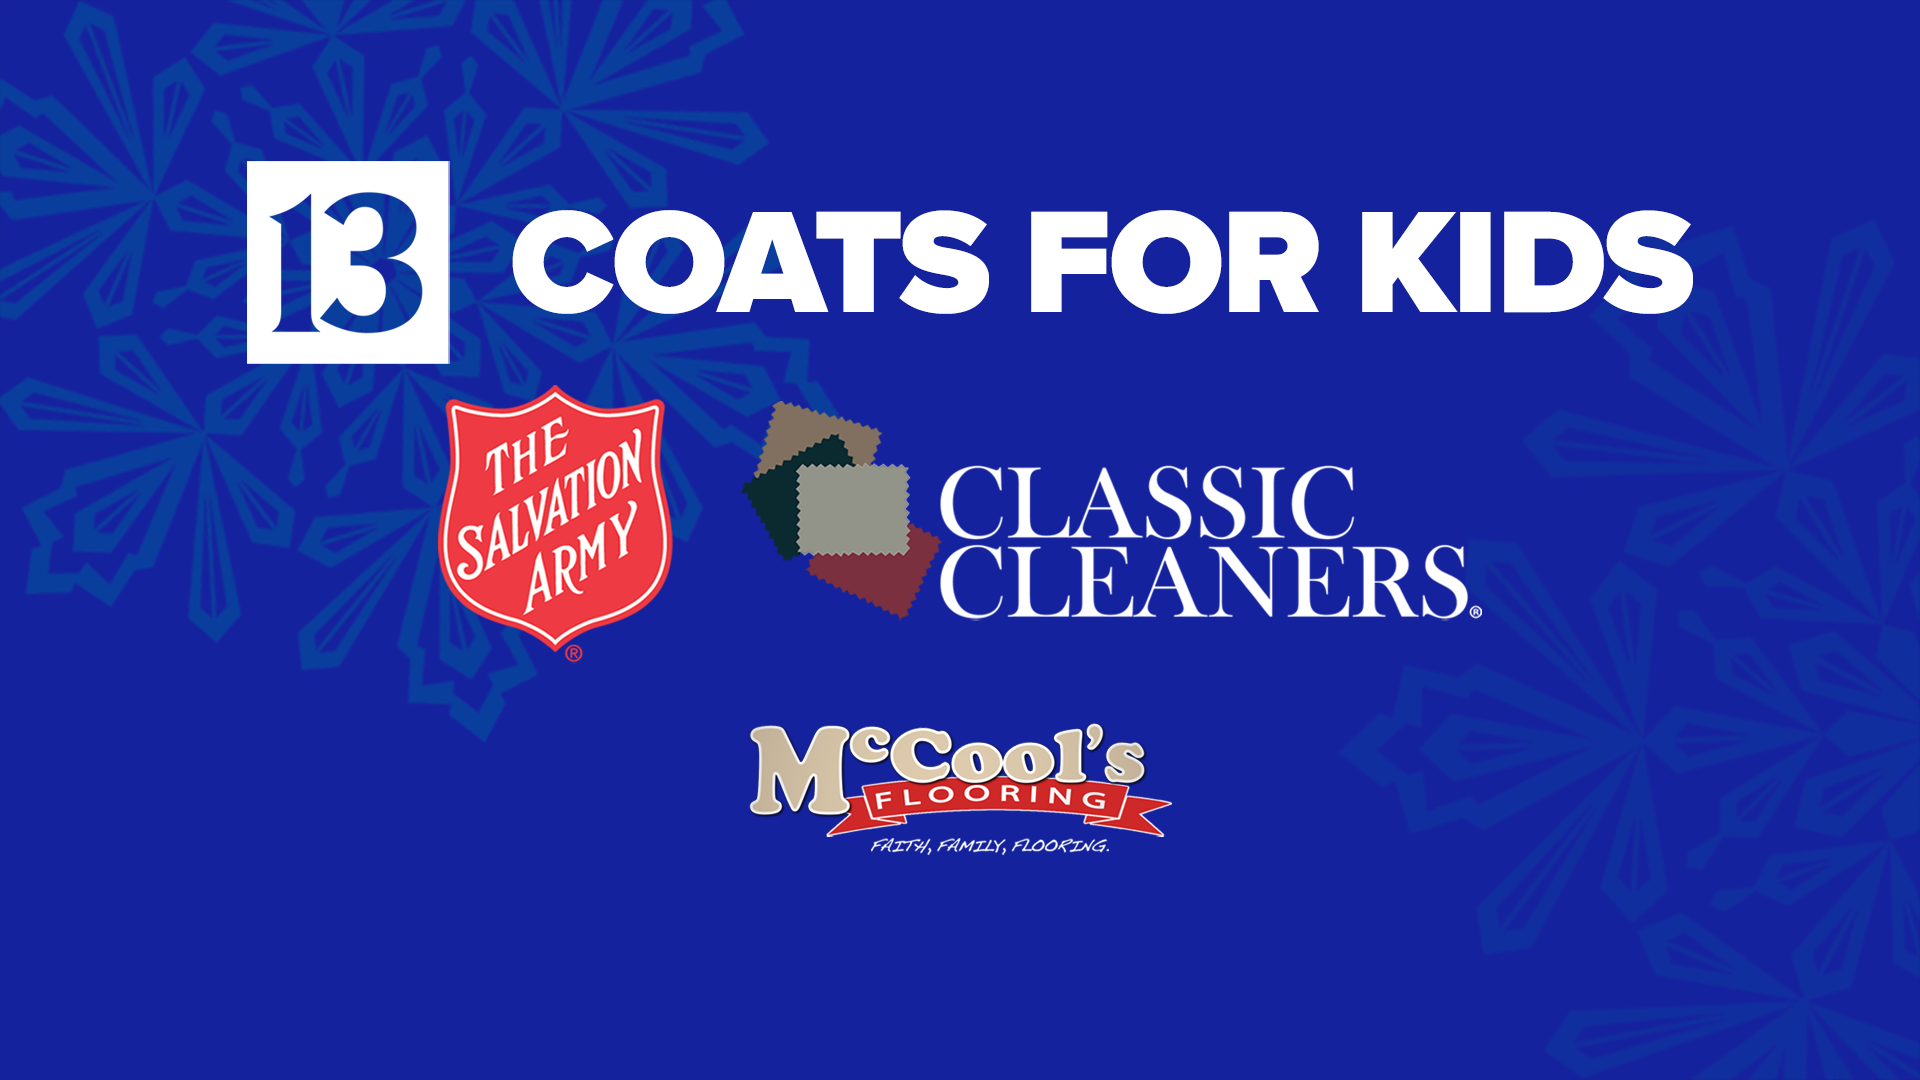 Donate any new or gently used kids coats at any Classic Cleaners through Oct. 8.